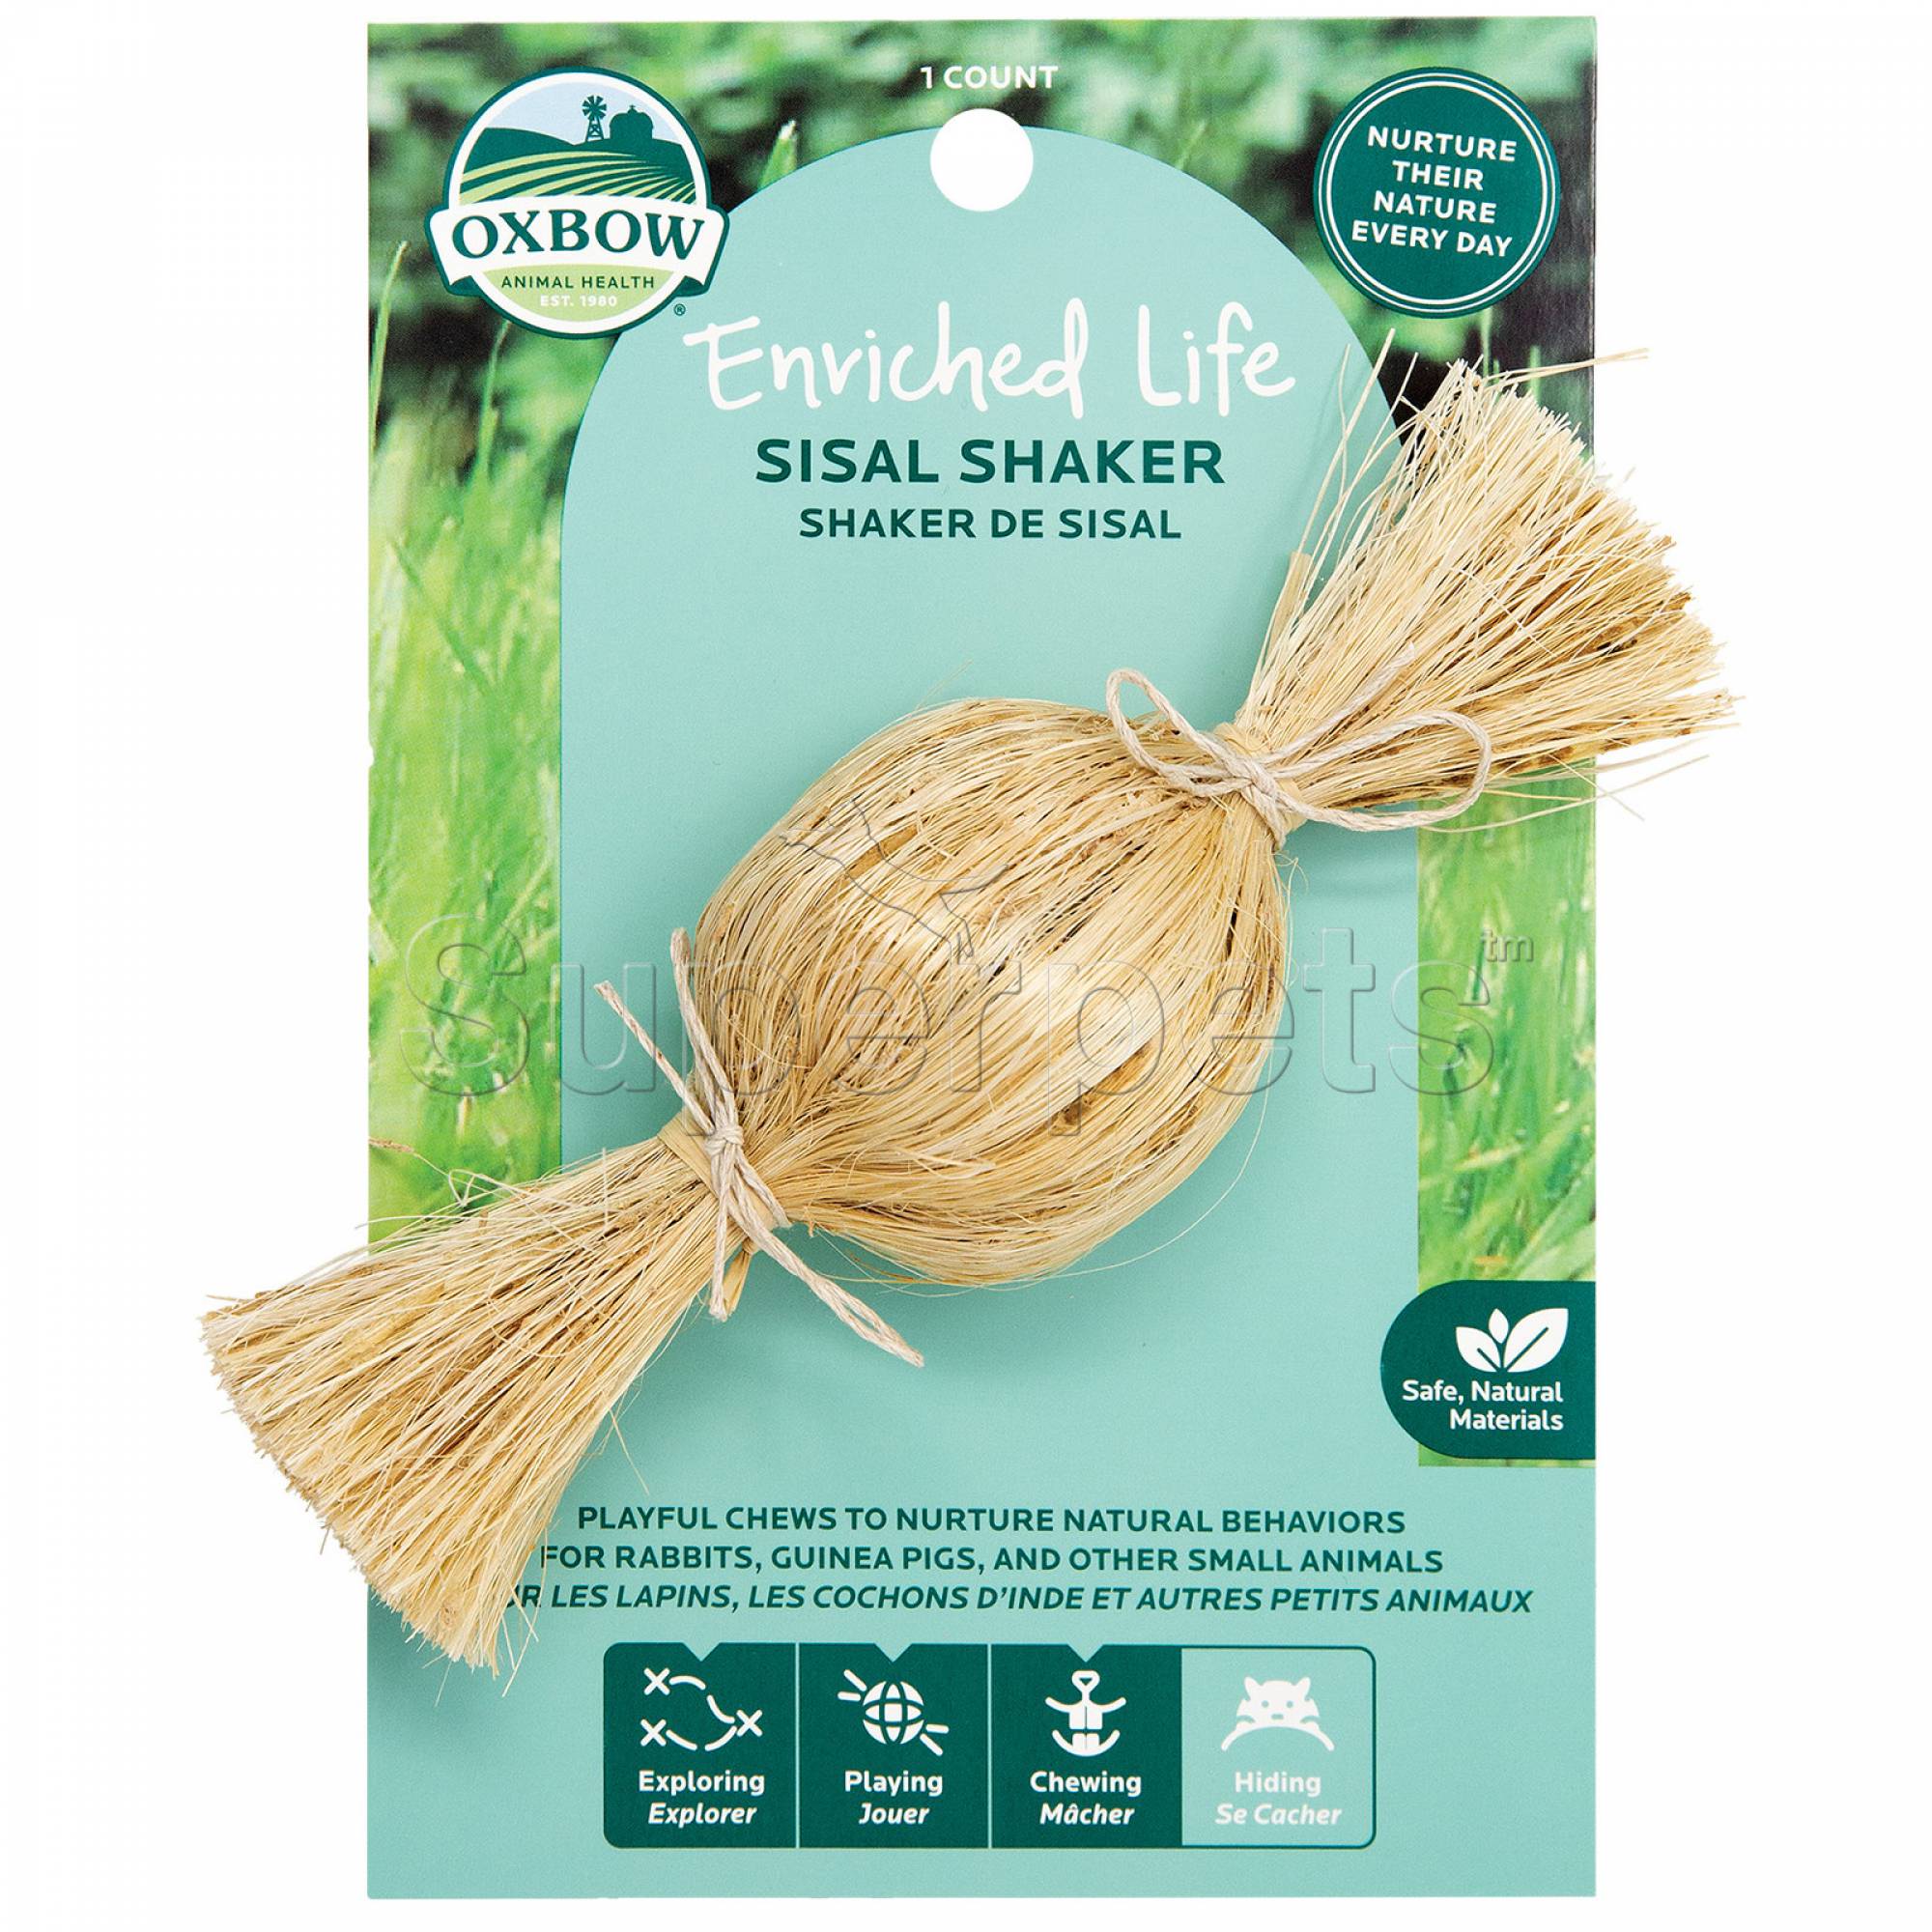 Oxbow Enriched Life Sisal Shaker